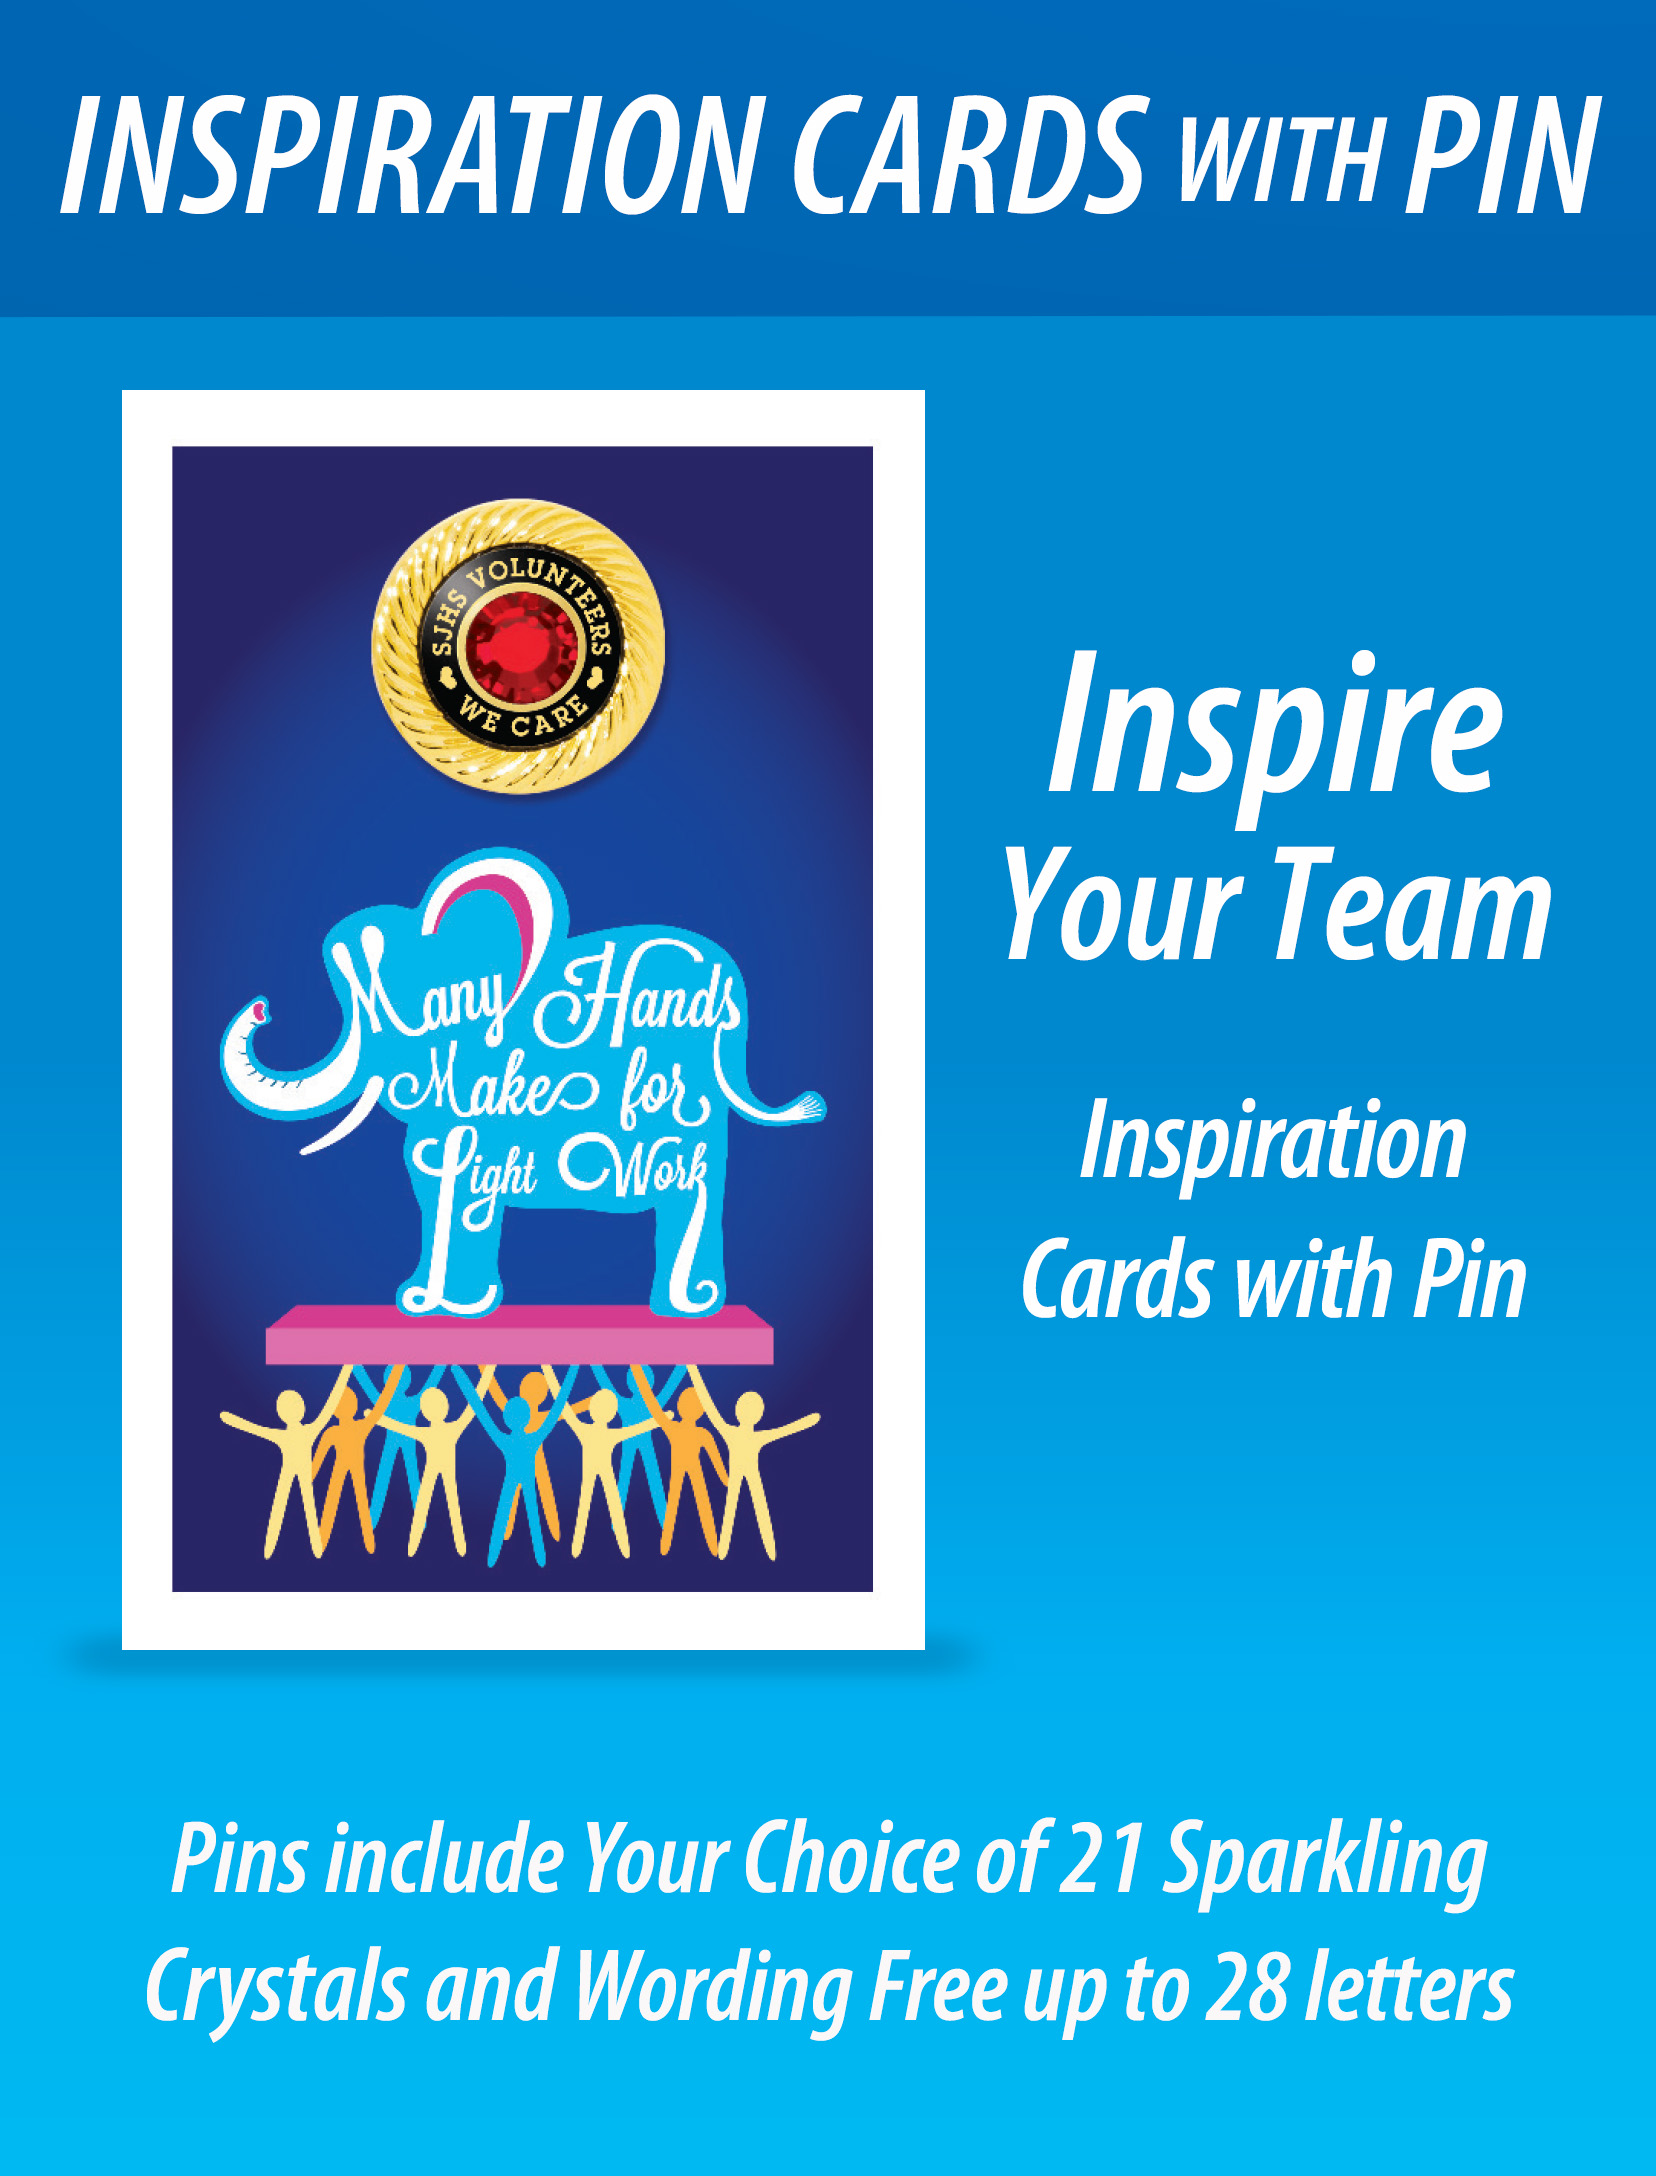 Inspiration Cards with Pin